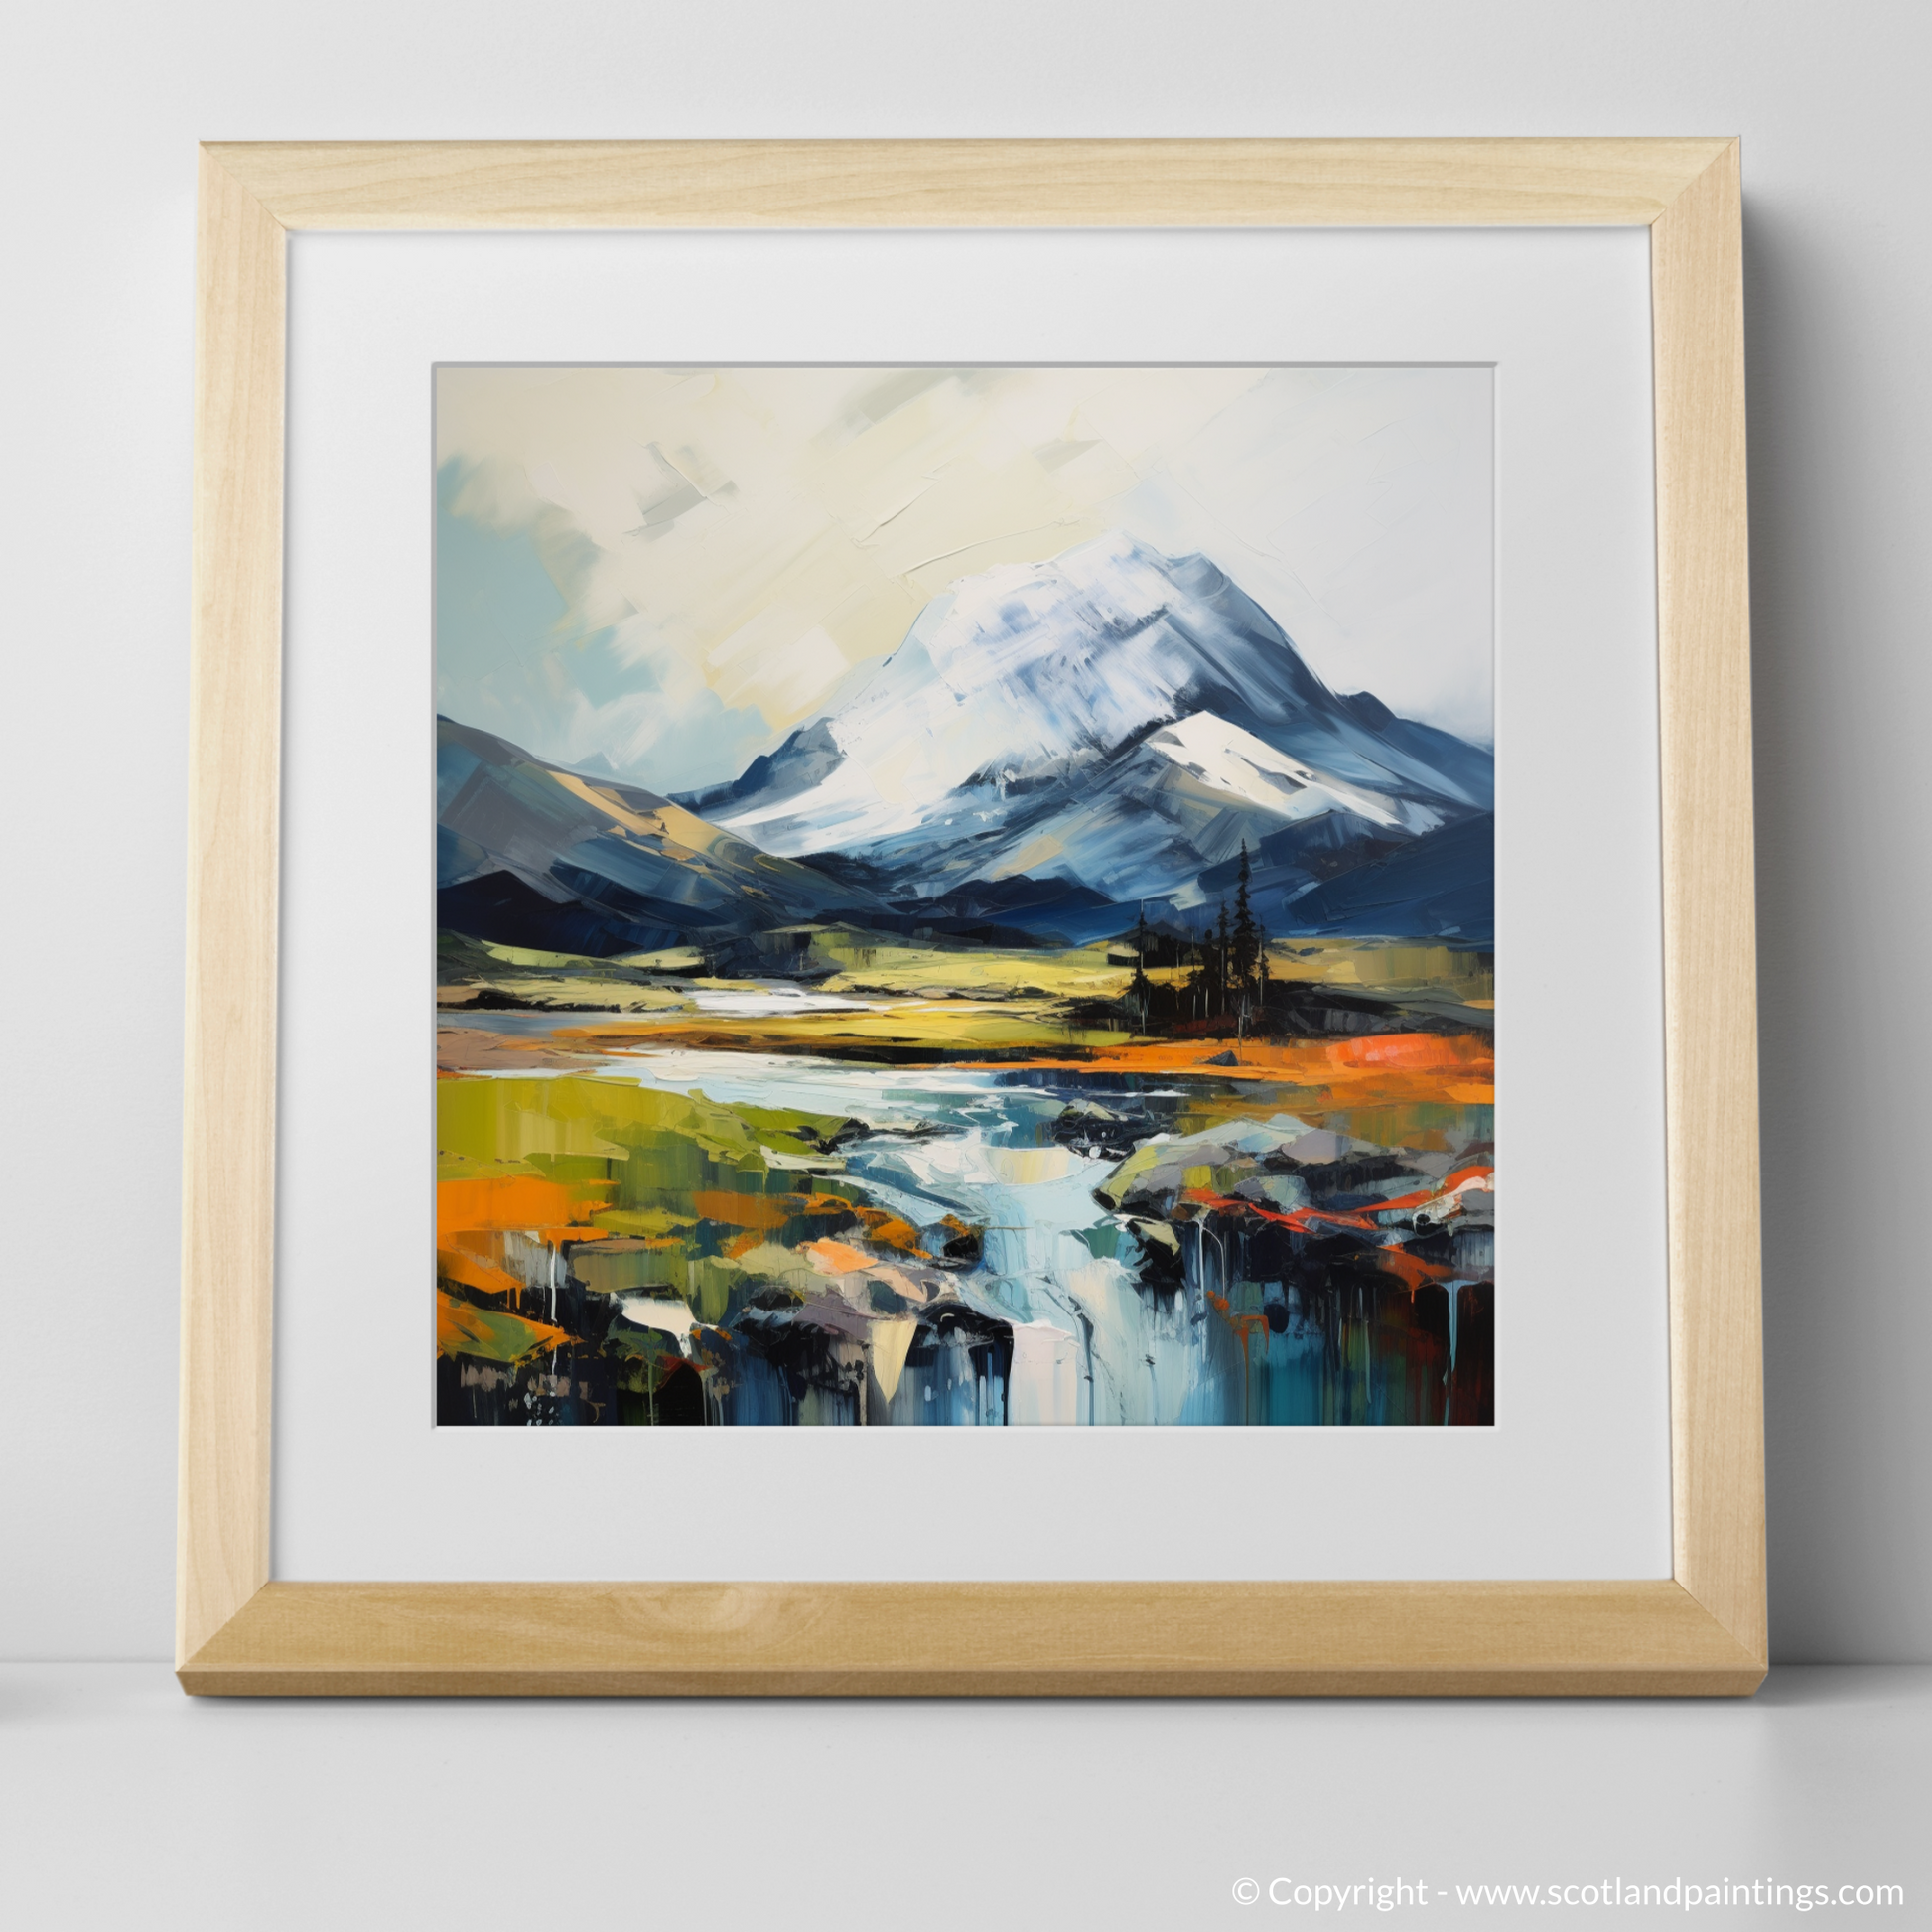 Art Print of Ben More with a natural frame